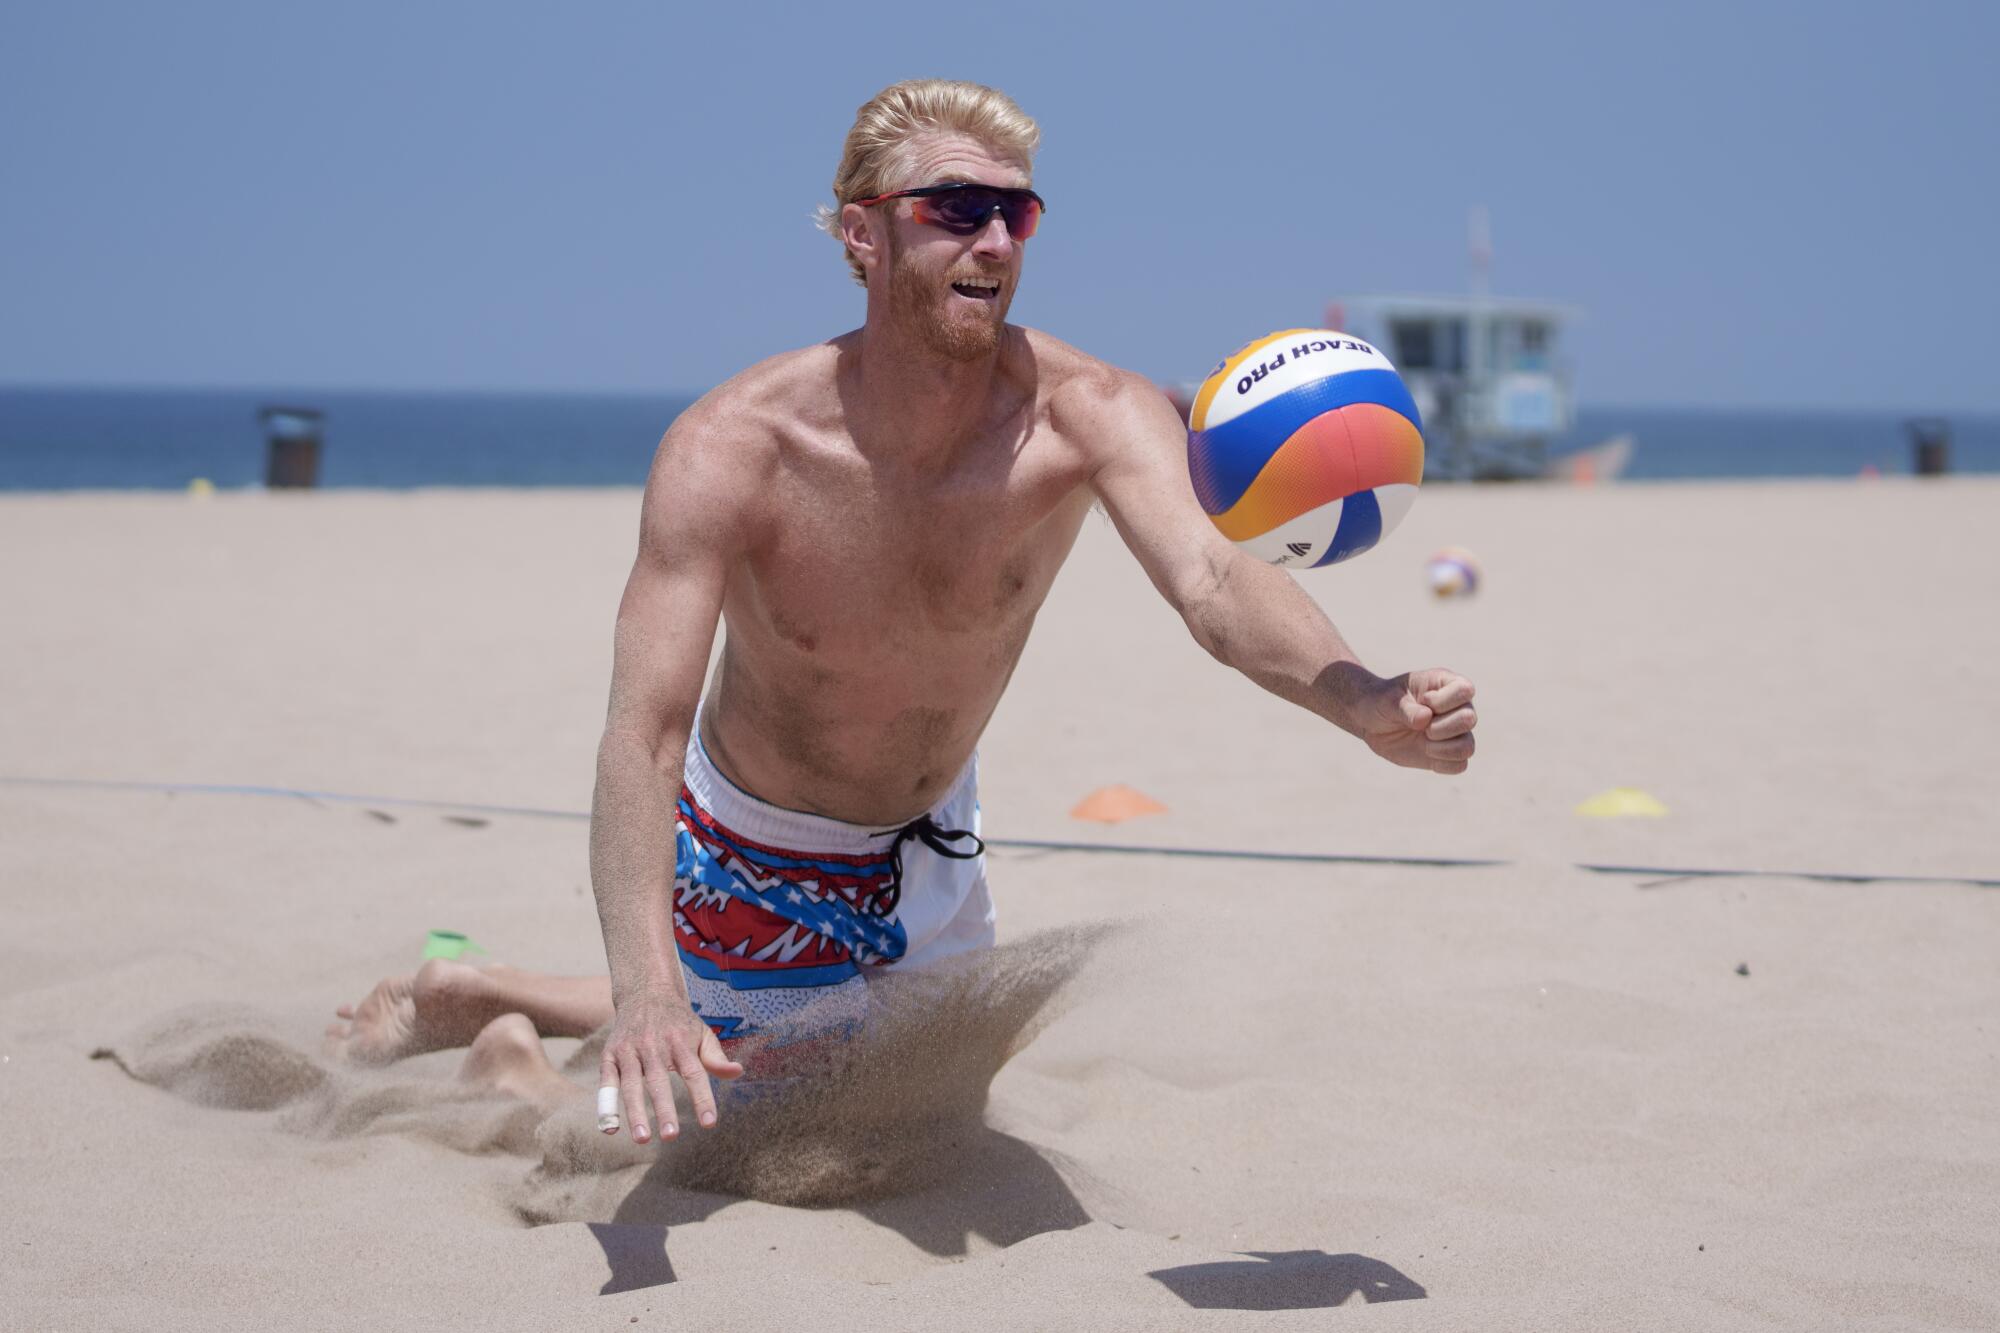 Beach volleyball player Chase Budinger diving for the ball while playing on the sand at Hermosa Beach